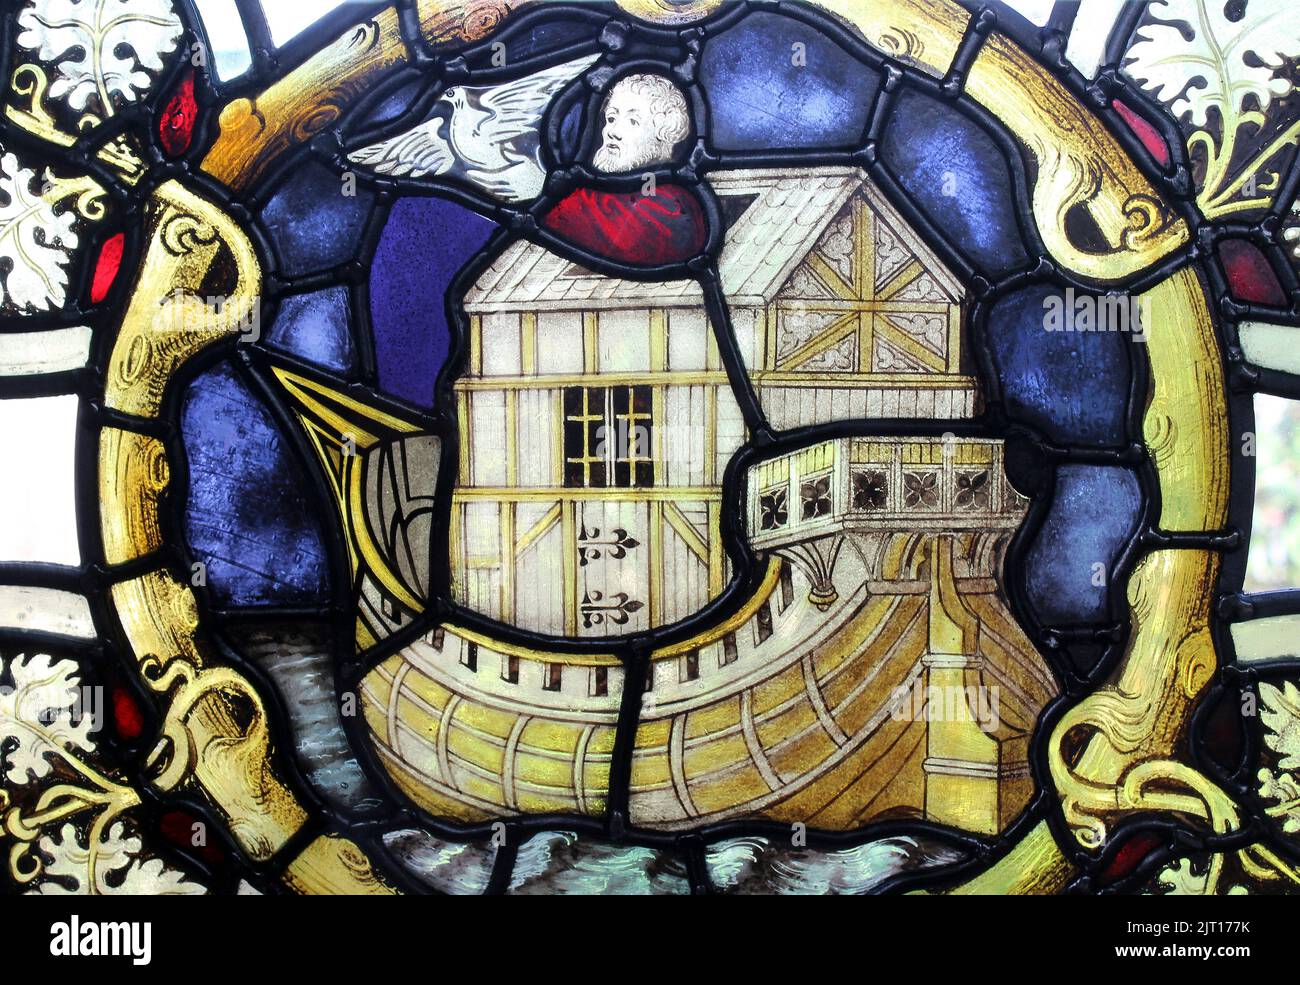 Noah Setting Dove Free From The Ark Stained Glass Window, Birkenhead Priory UK Stock Photo